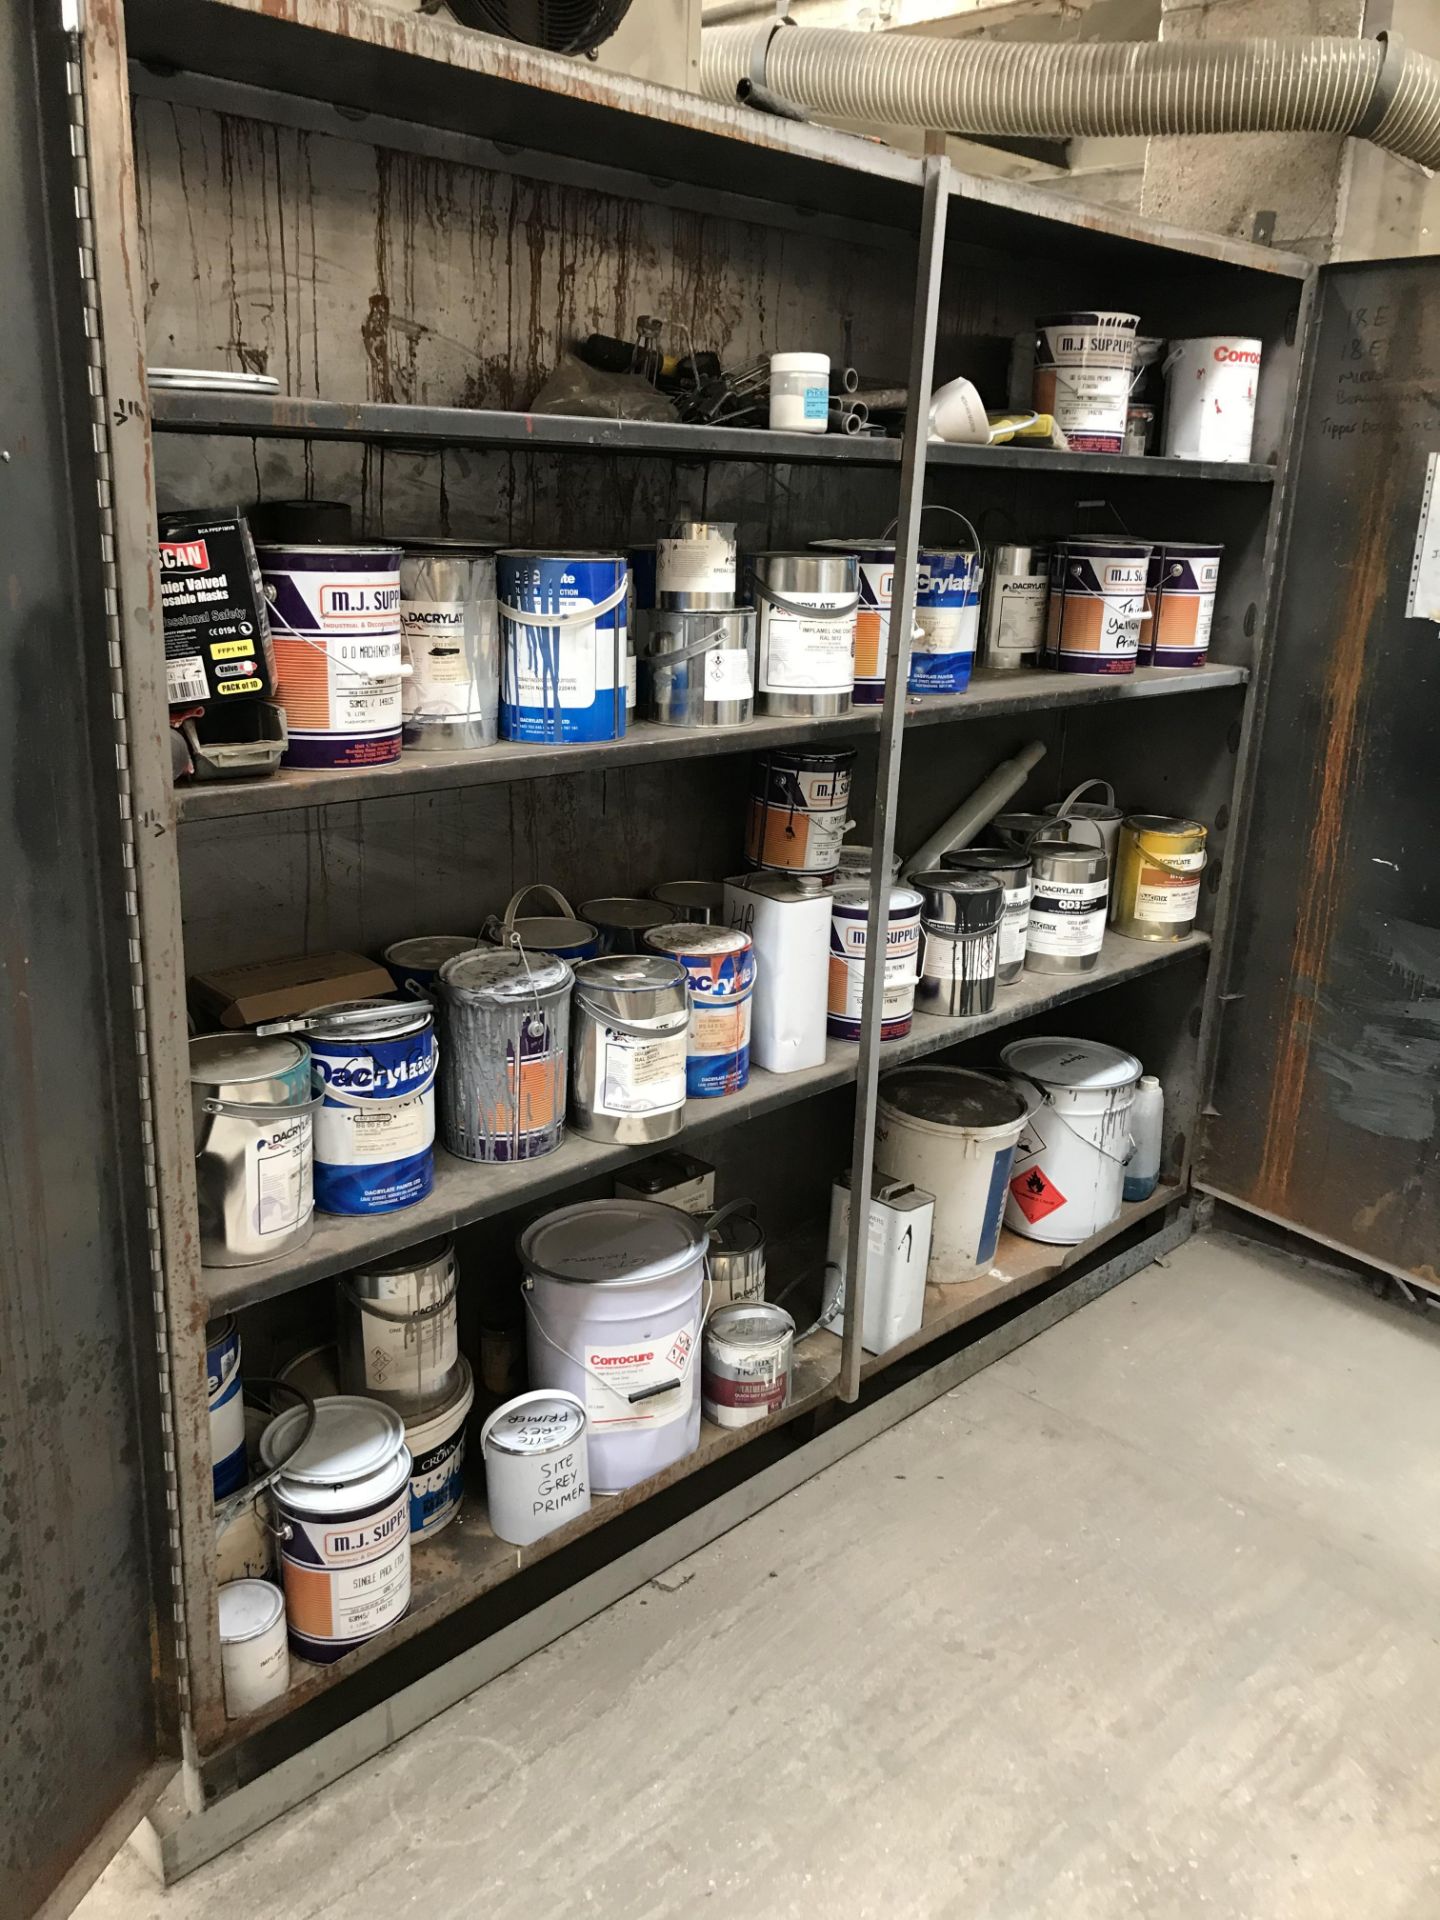 A Quantity of Paints, Primers and Thinners with Heavy Duty Welded Steel Inflammables Cabinet, 96in w - Image 2 of 4